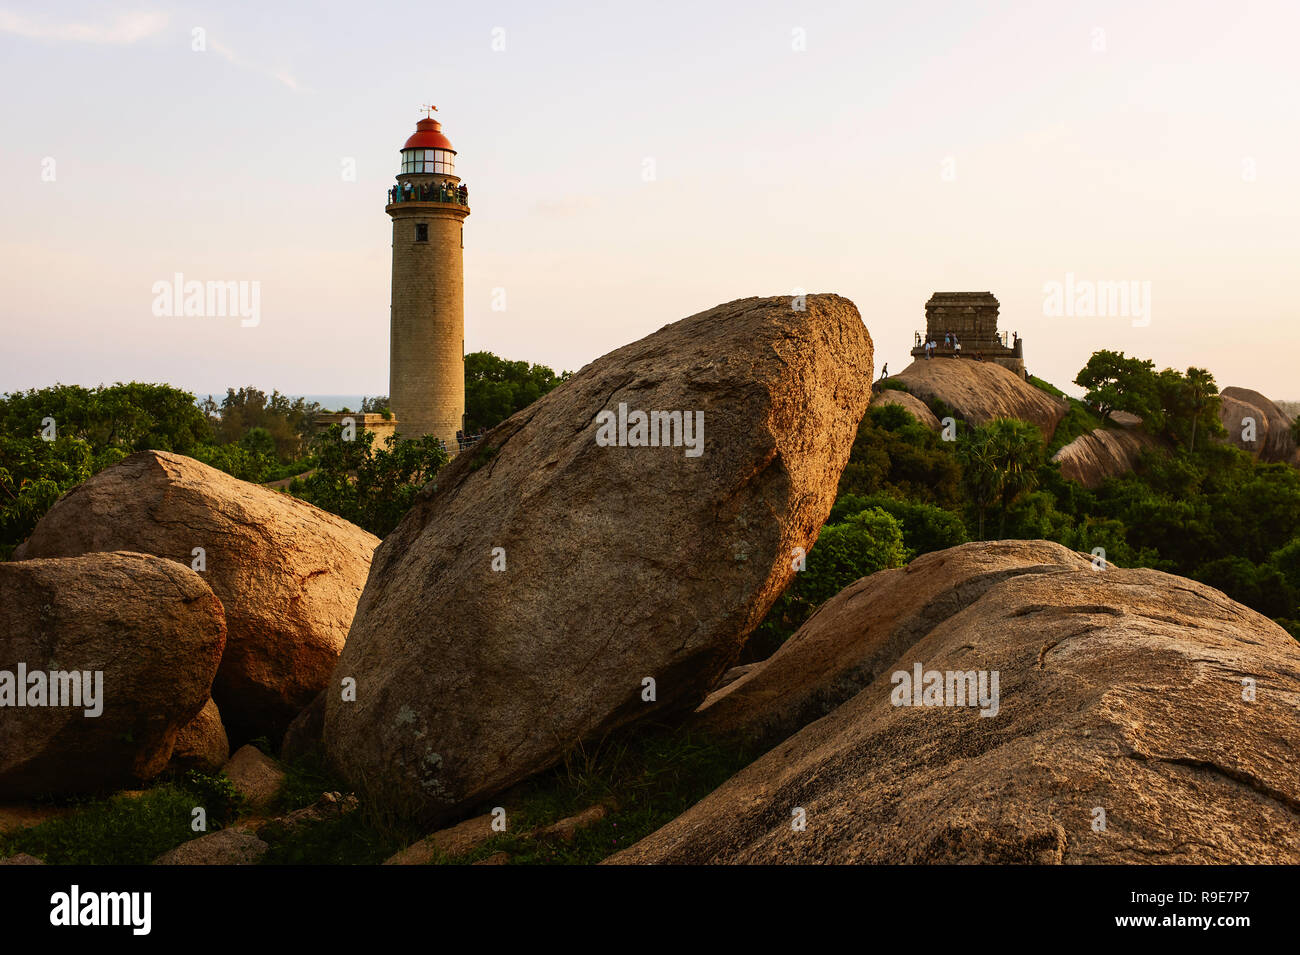 Ancient boulders and trees surround the modern lighthouse and ruins of the old lighthouse at dusk, Mamallapuram, Tamil Nadu, India. Stock Photo